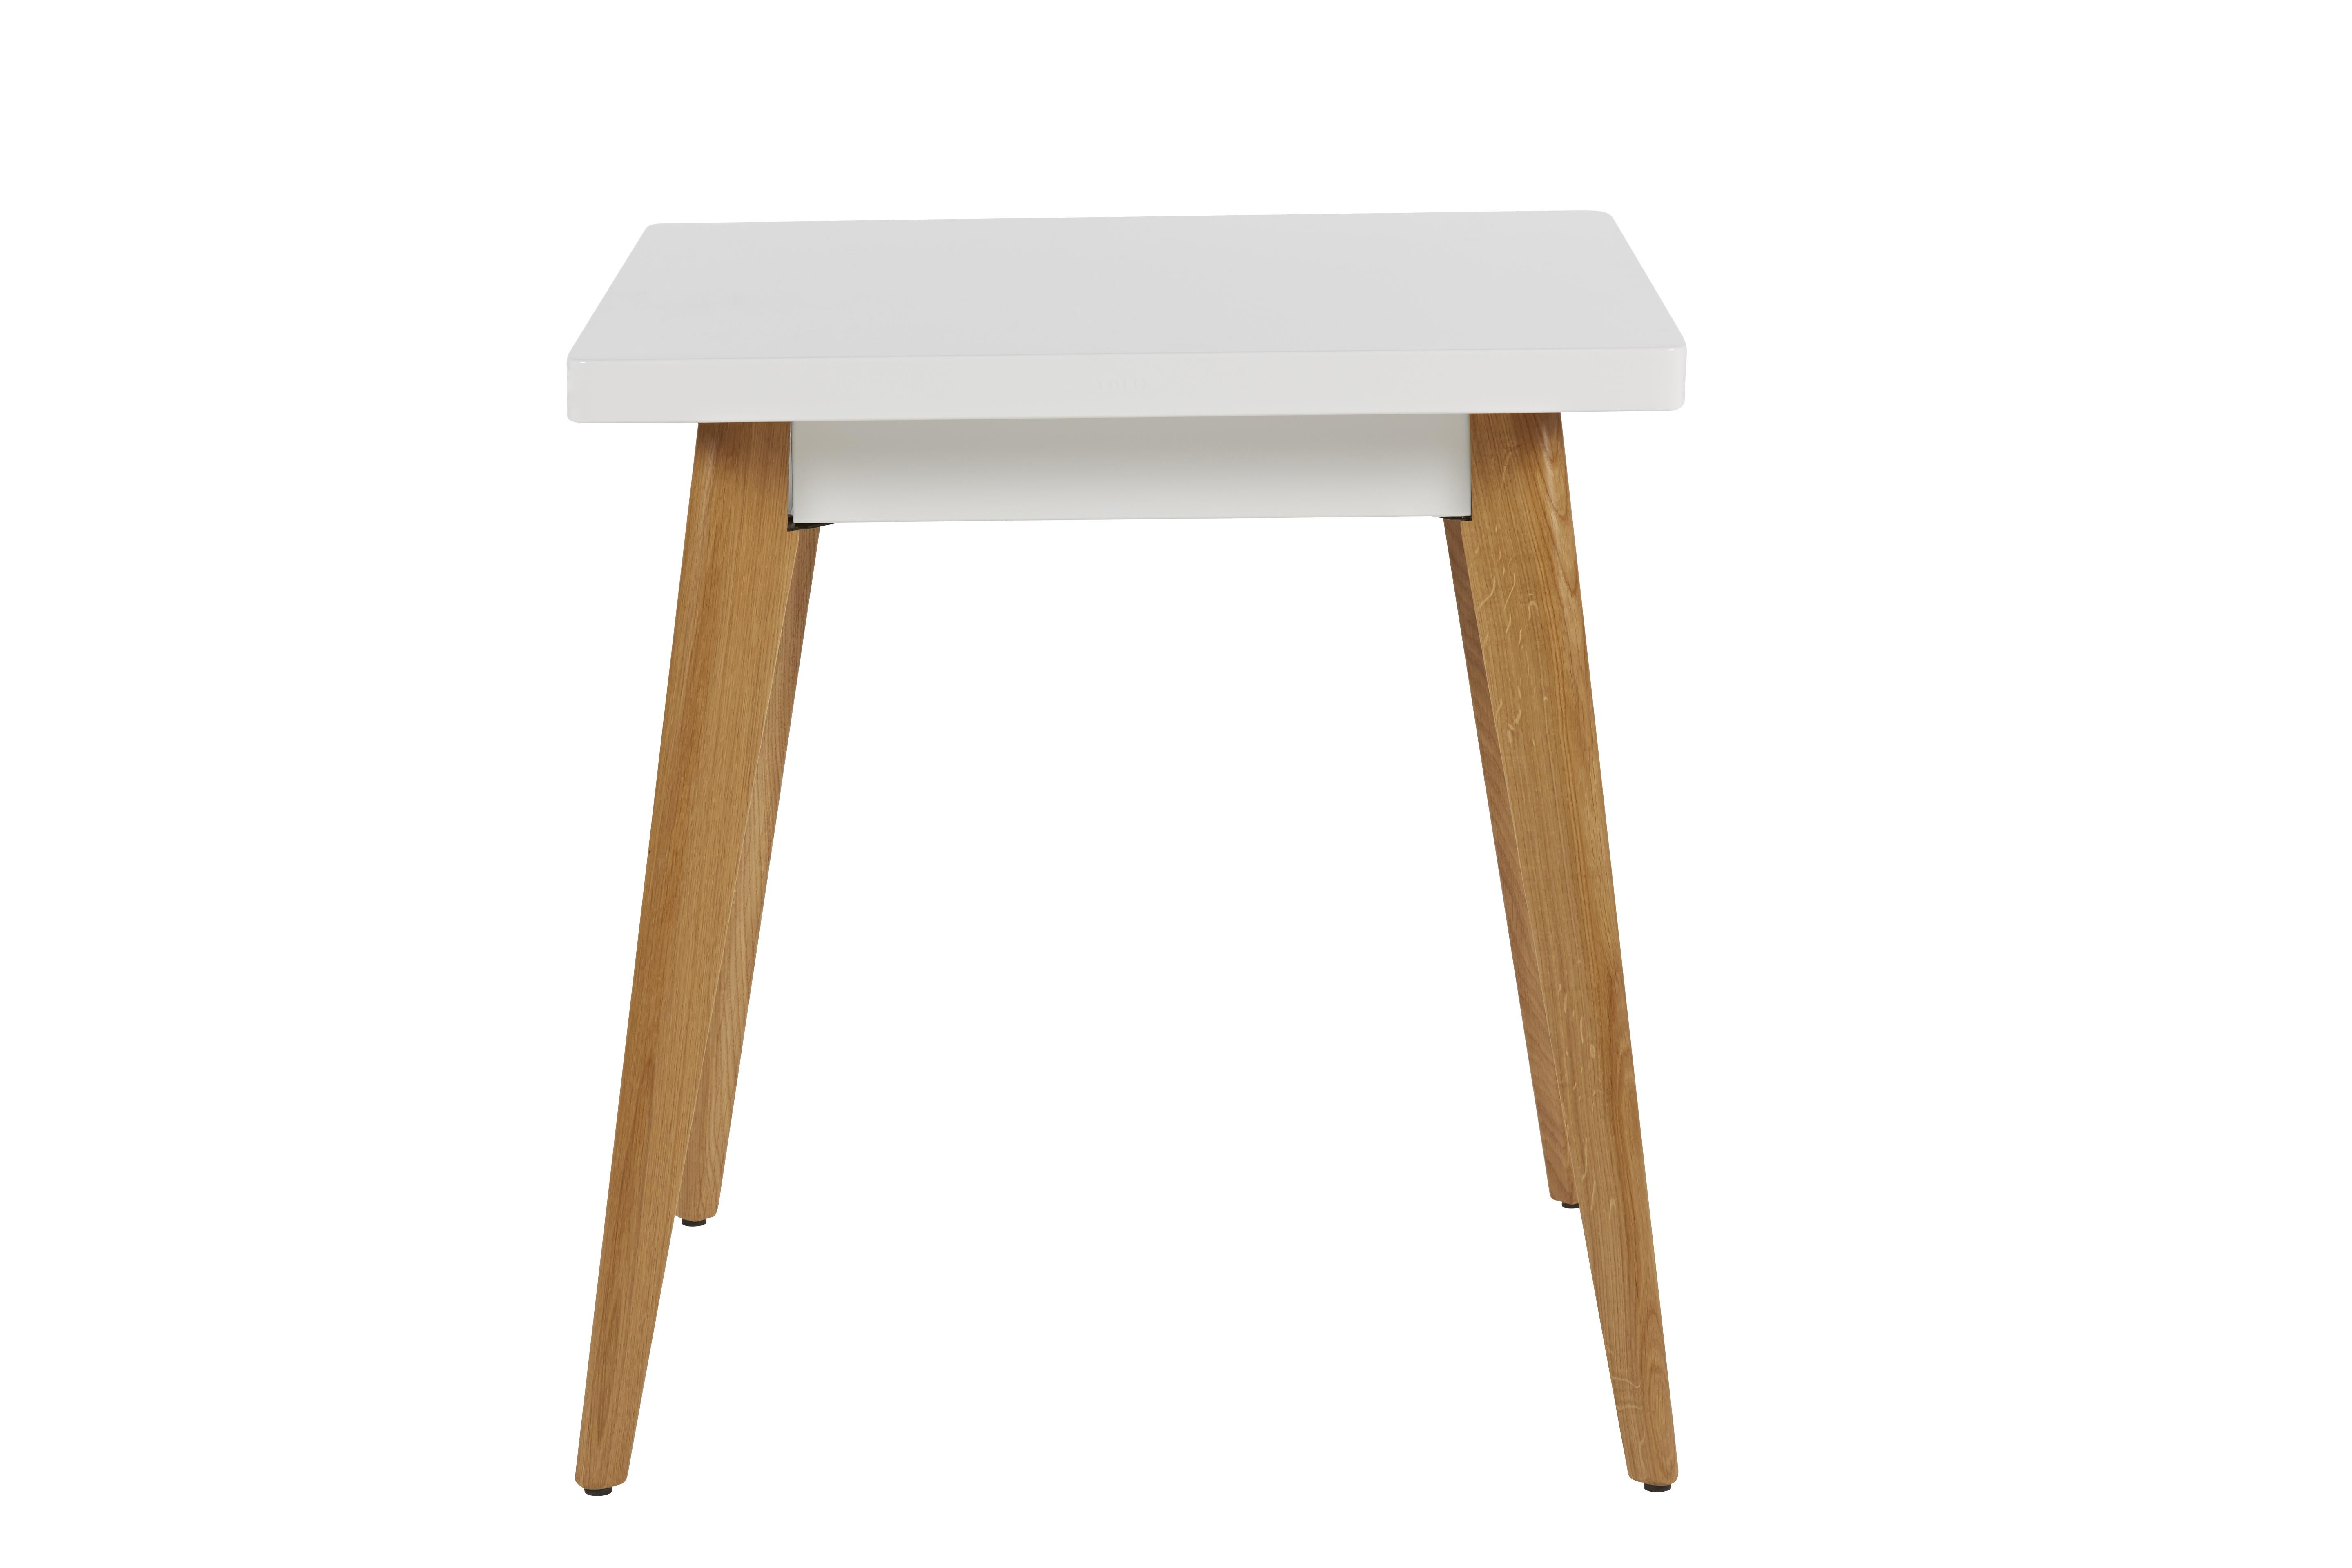 - The authentic 55 Table is available with wooden legs, for use indoor and out. The mix of materials adds warmth and versatility. The table blends in easily vintage, industrial, contemporary or Scandinavian-style interiors. 
- Steel table top /